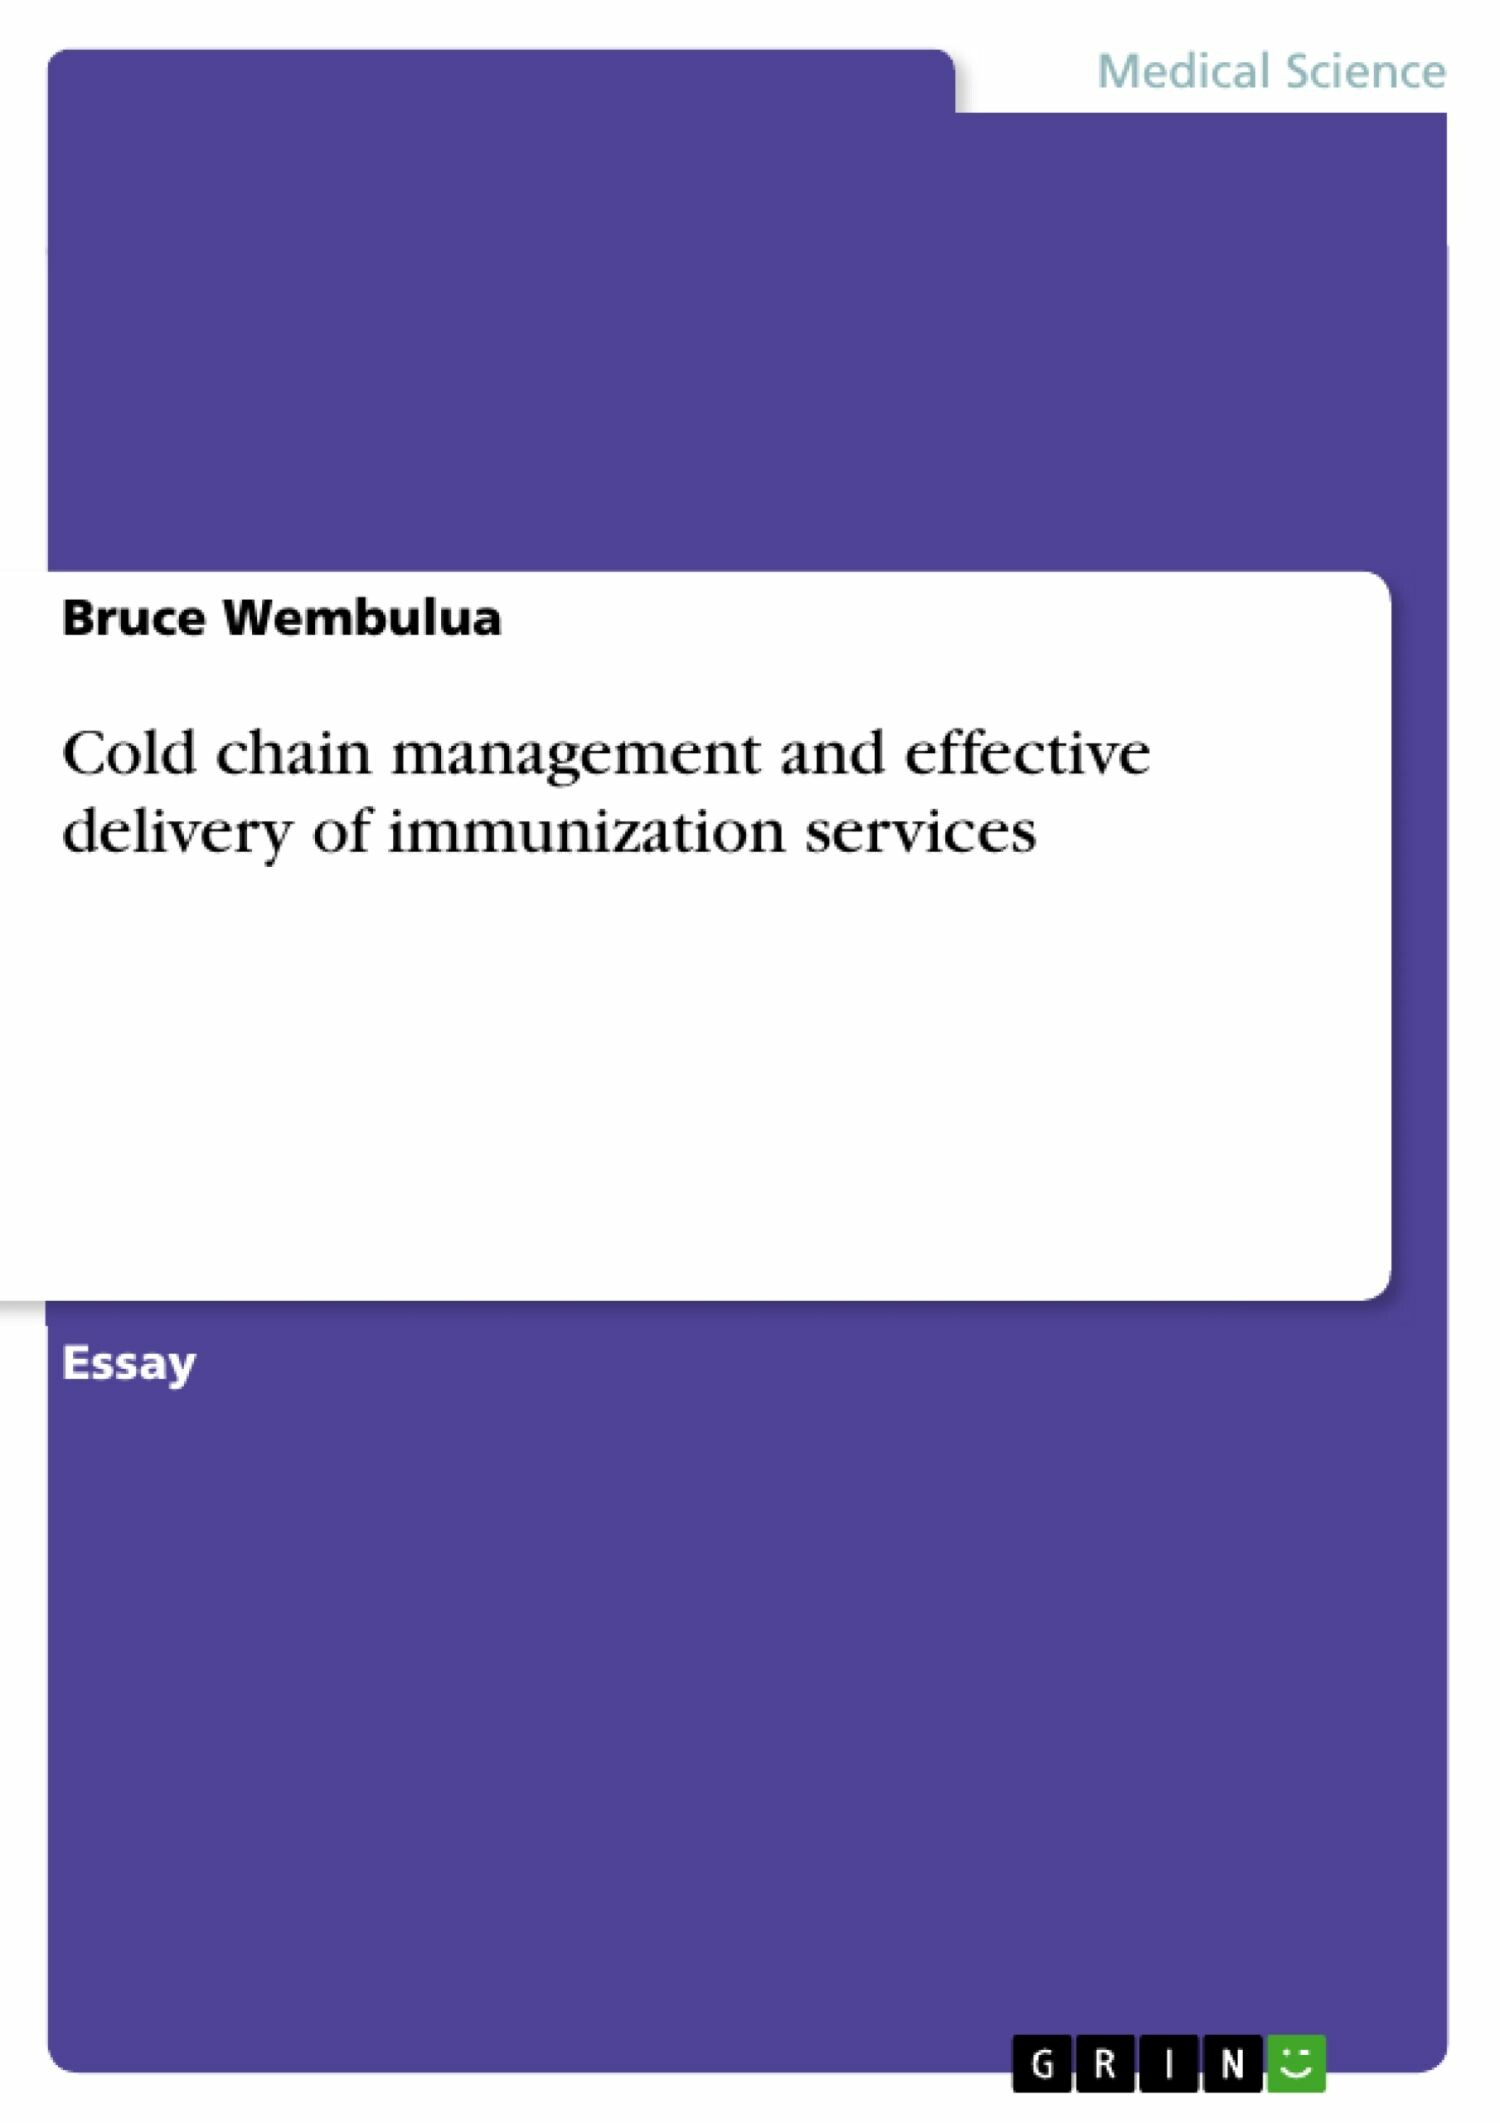 Cold chain management and effective delivery of immunization services